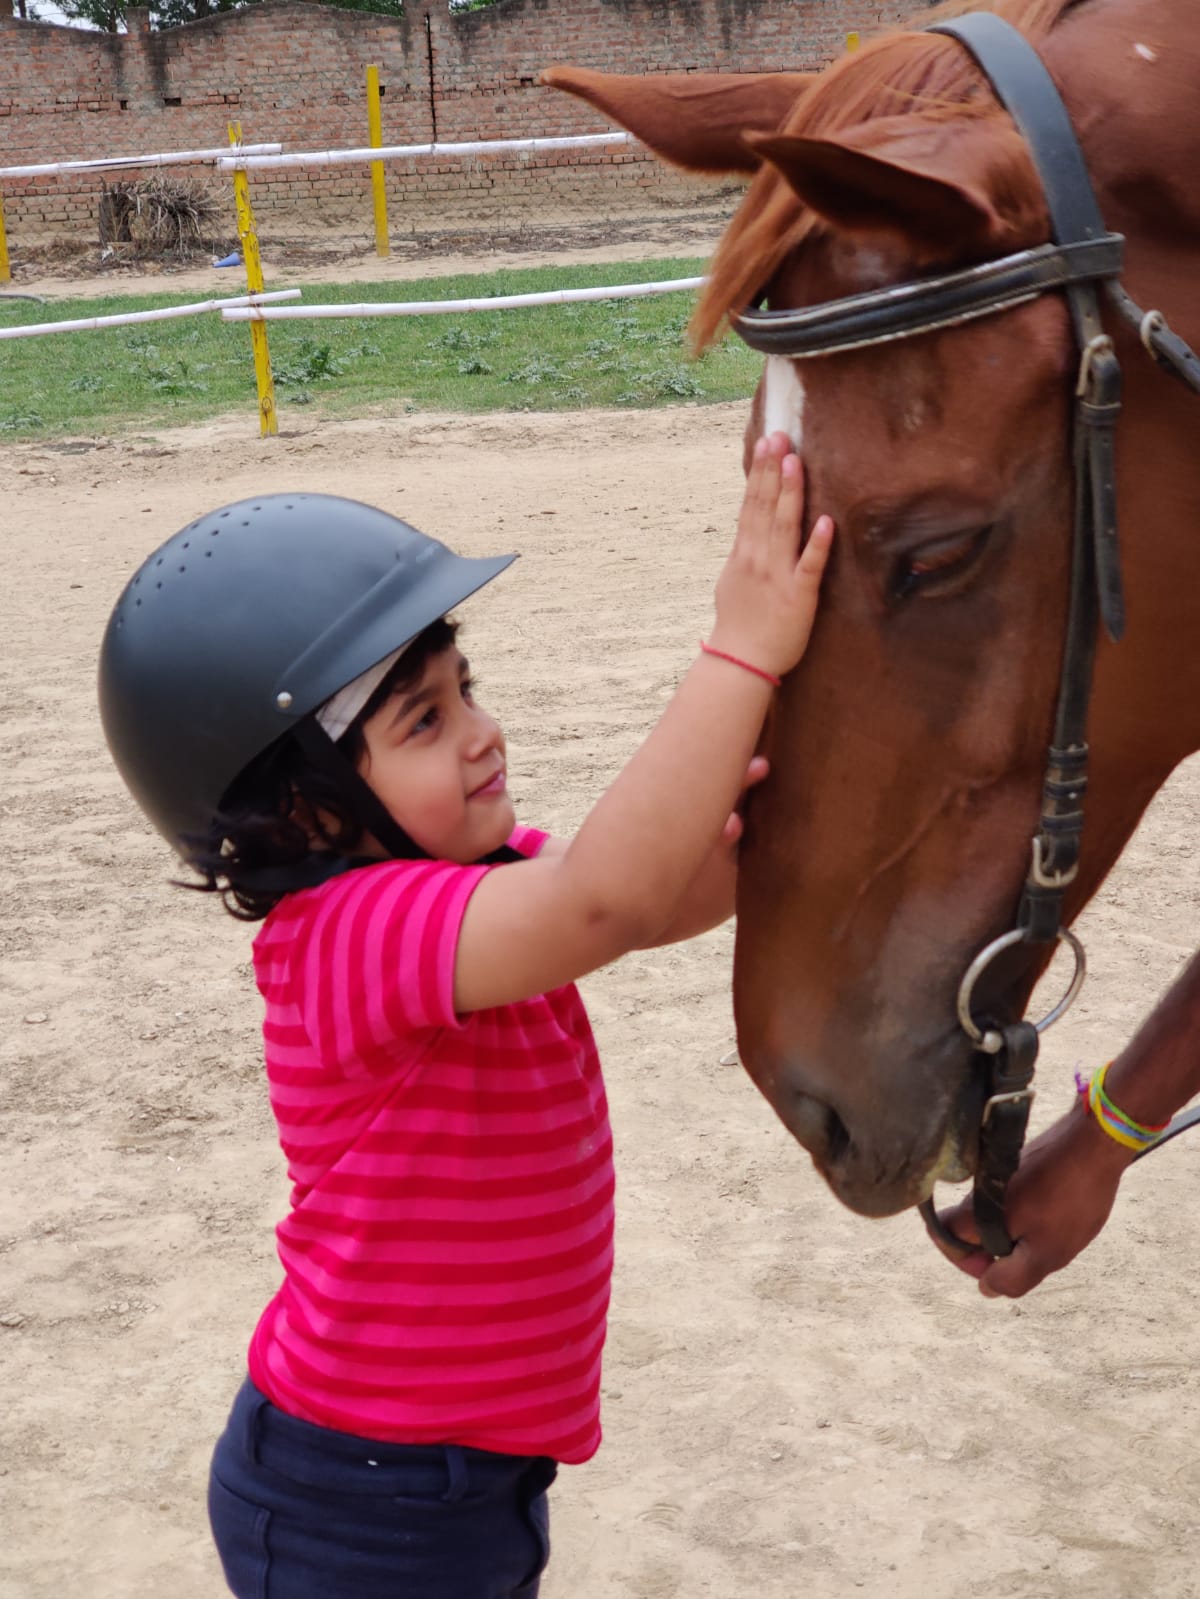 At 5, this little girl leaving no stone unturned for her equestrian dream